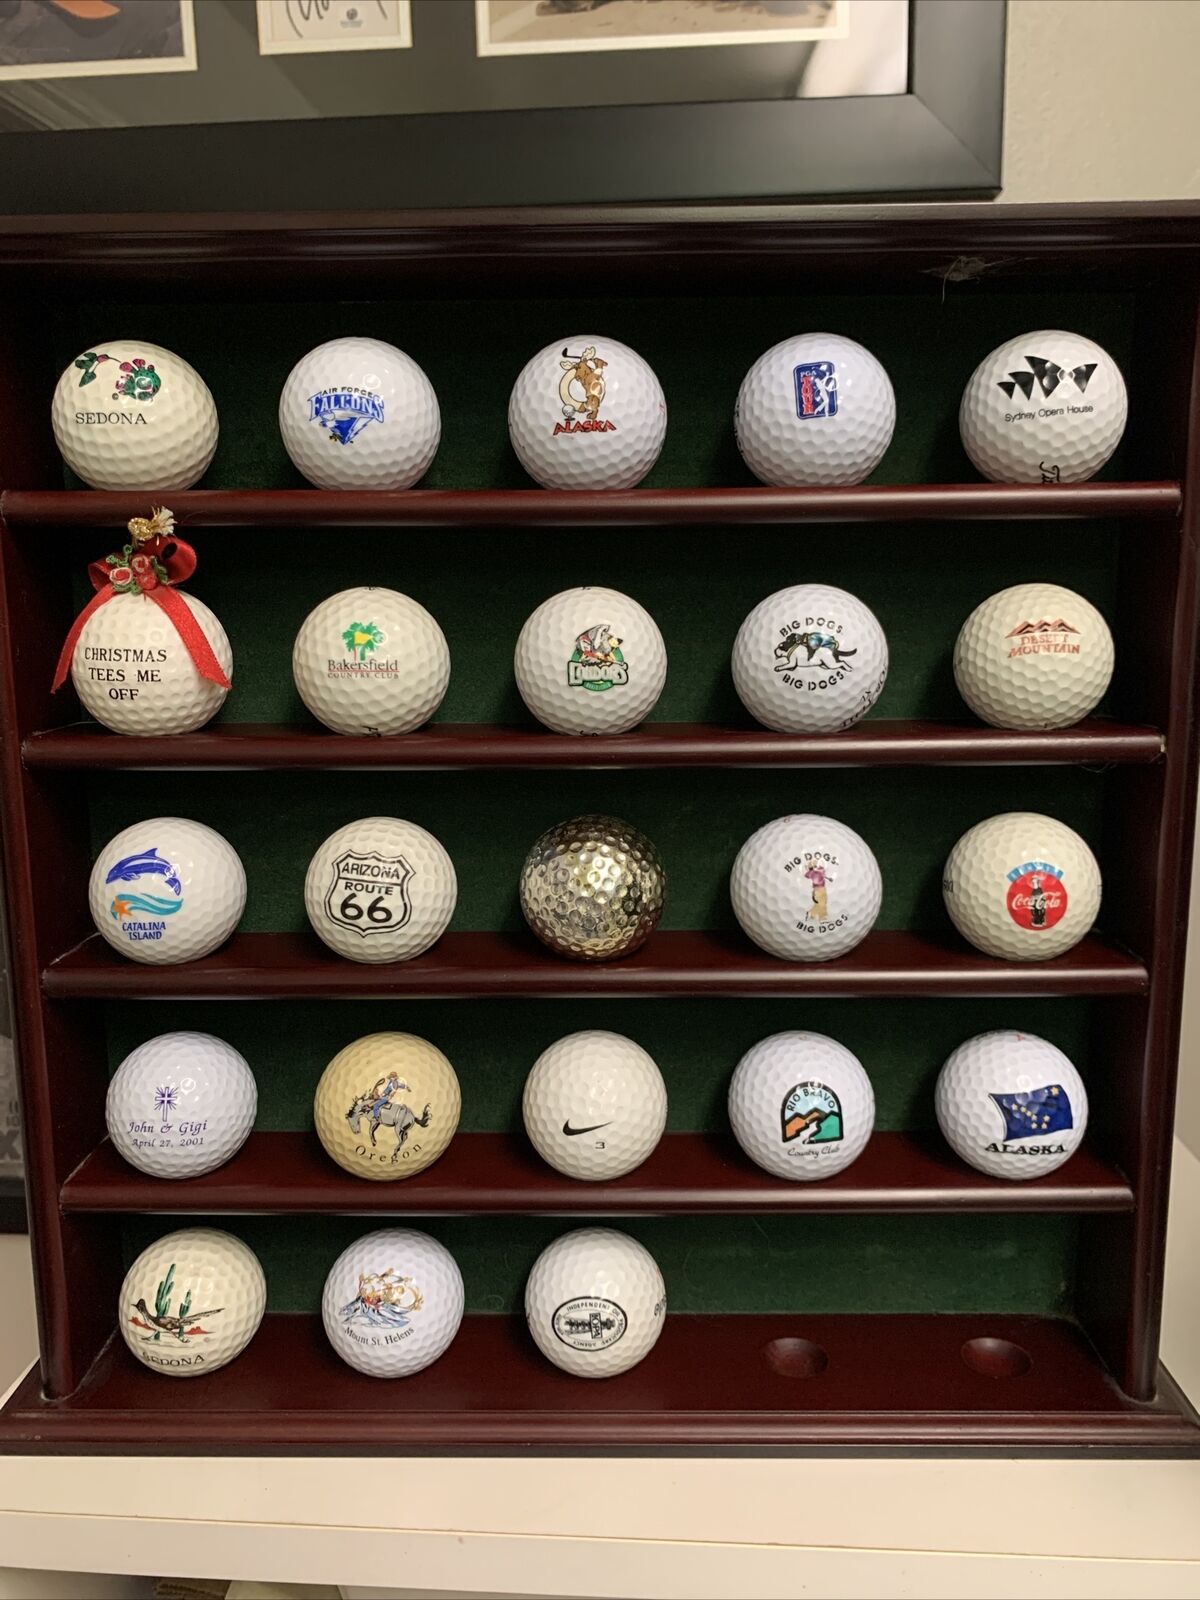 23 Collectible Golf Balls with Solid Wood 25 Ball Display Case Coca Cola Rte 66